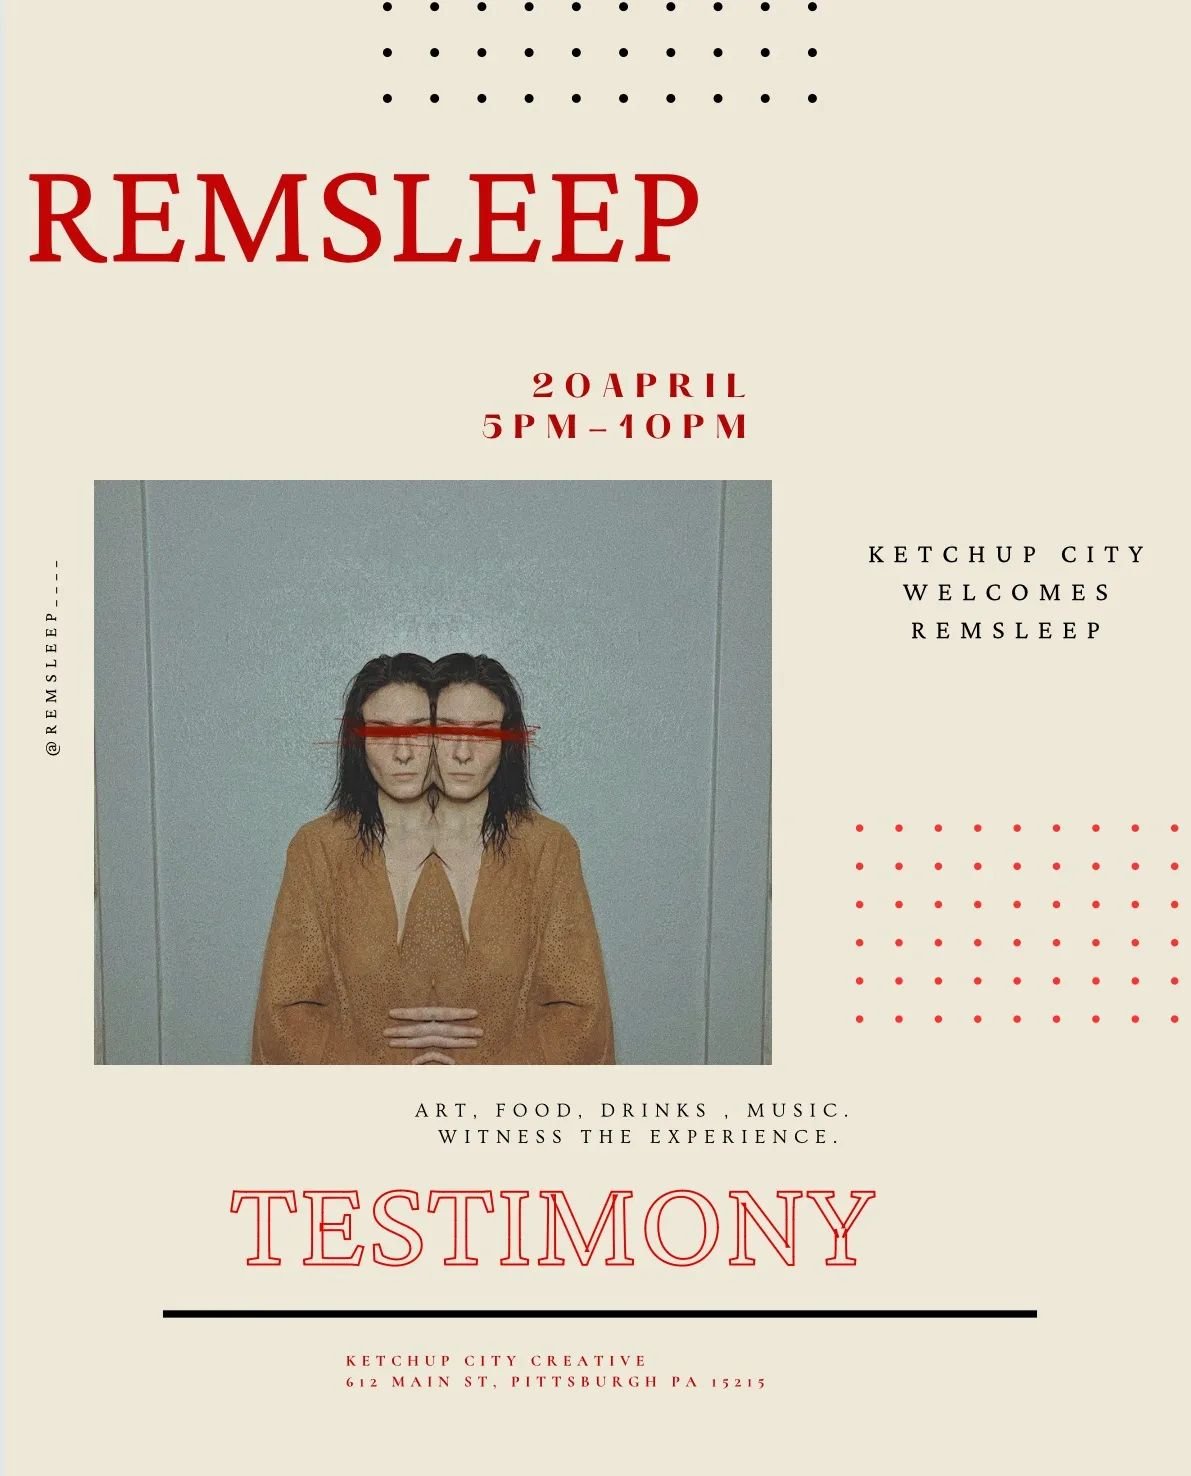 One day only. @remsleep____ TESTINONY.
April 20 from 5-10pm.
Come experience the work of @remsleep____